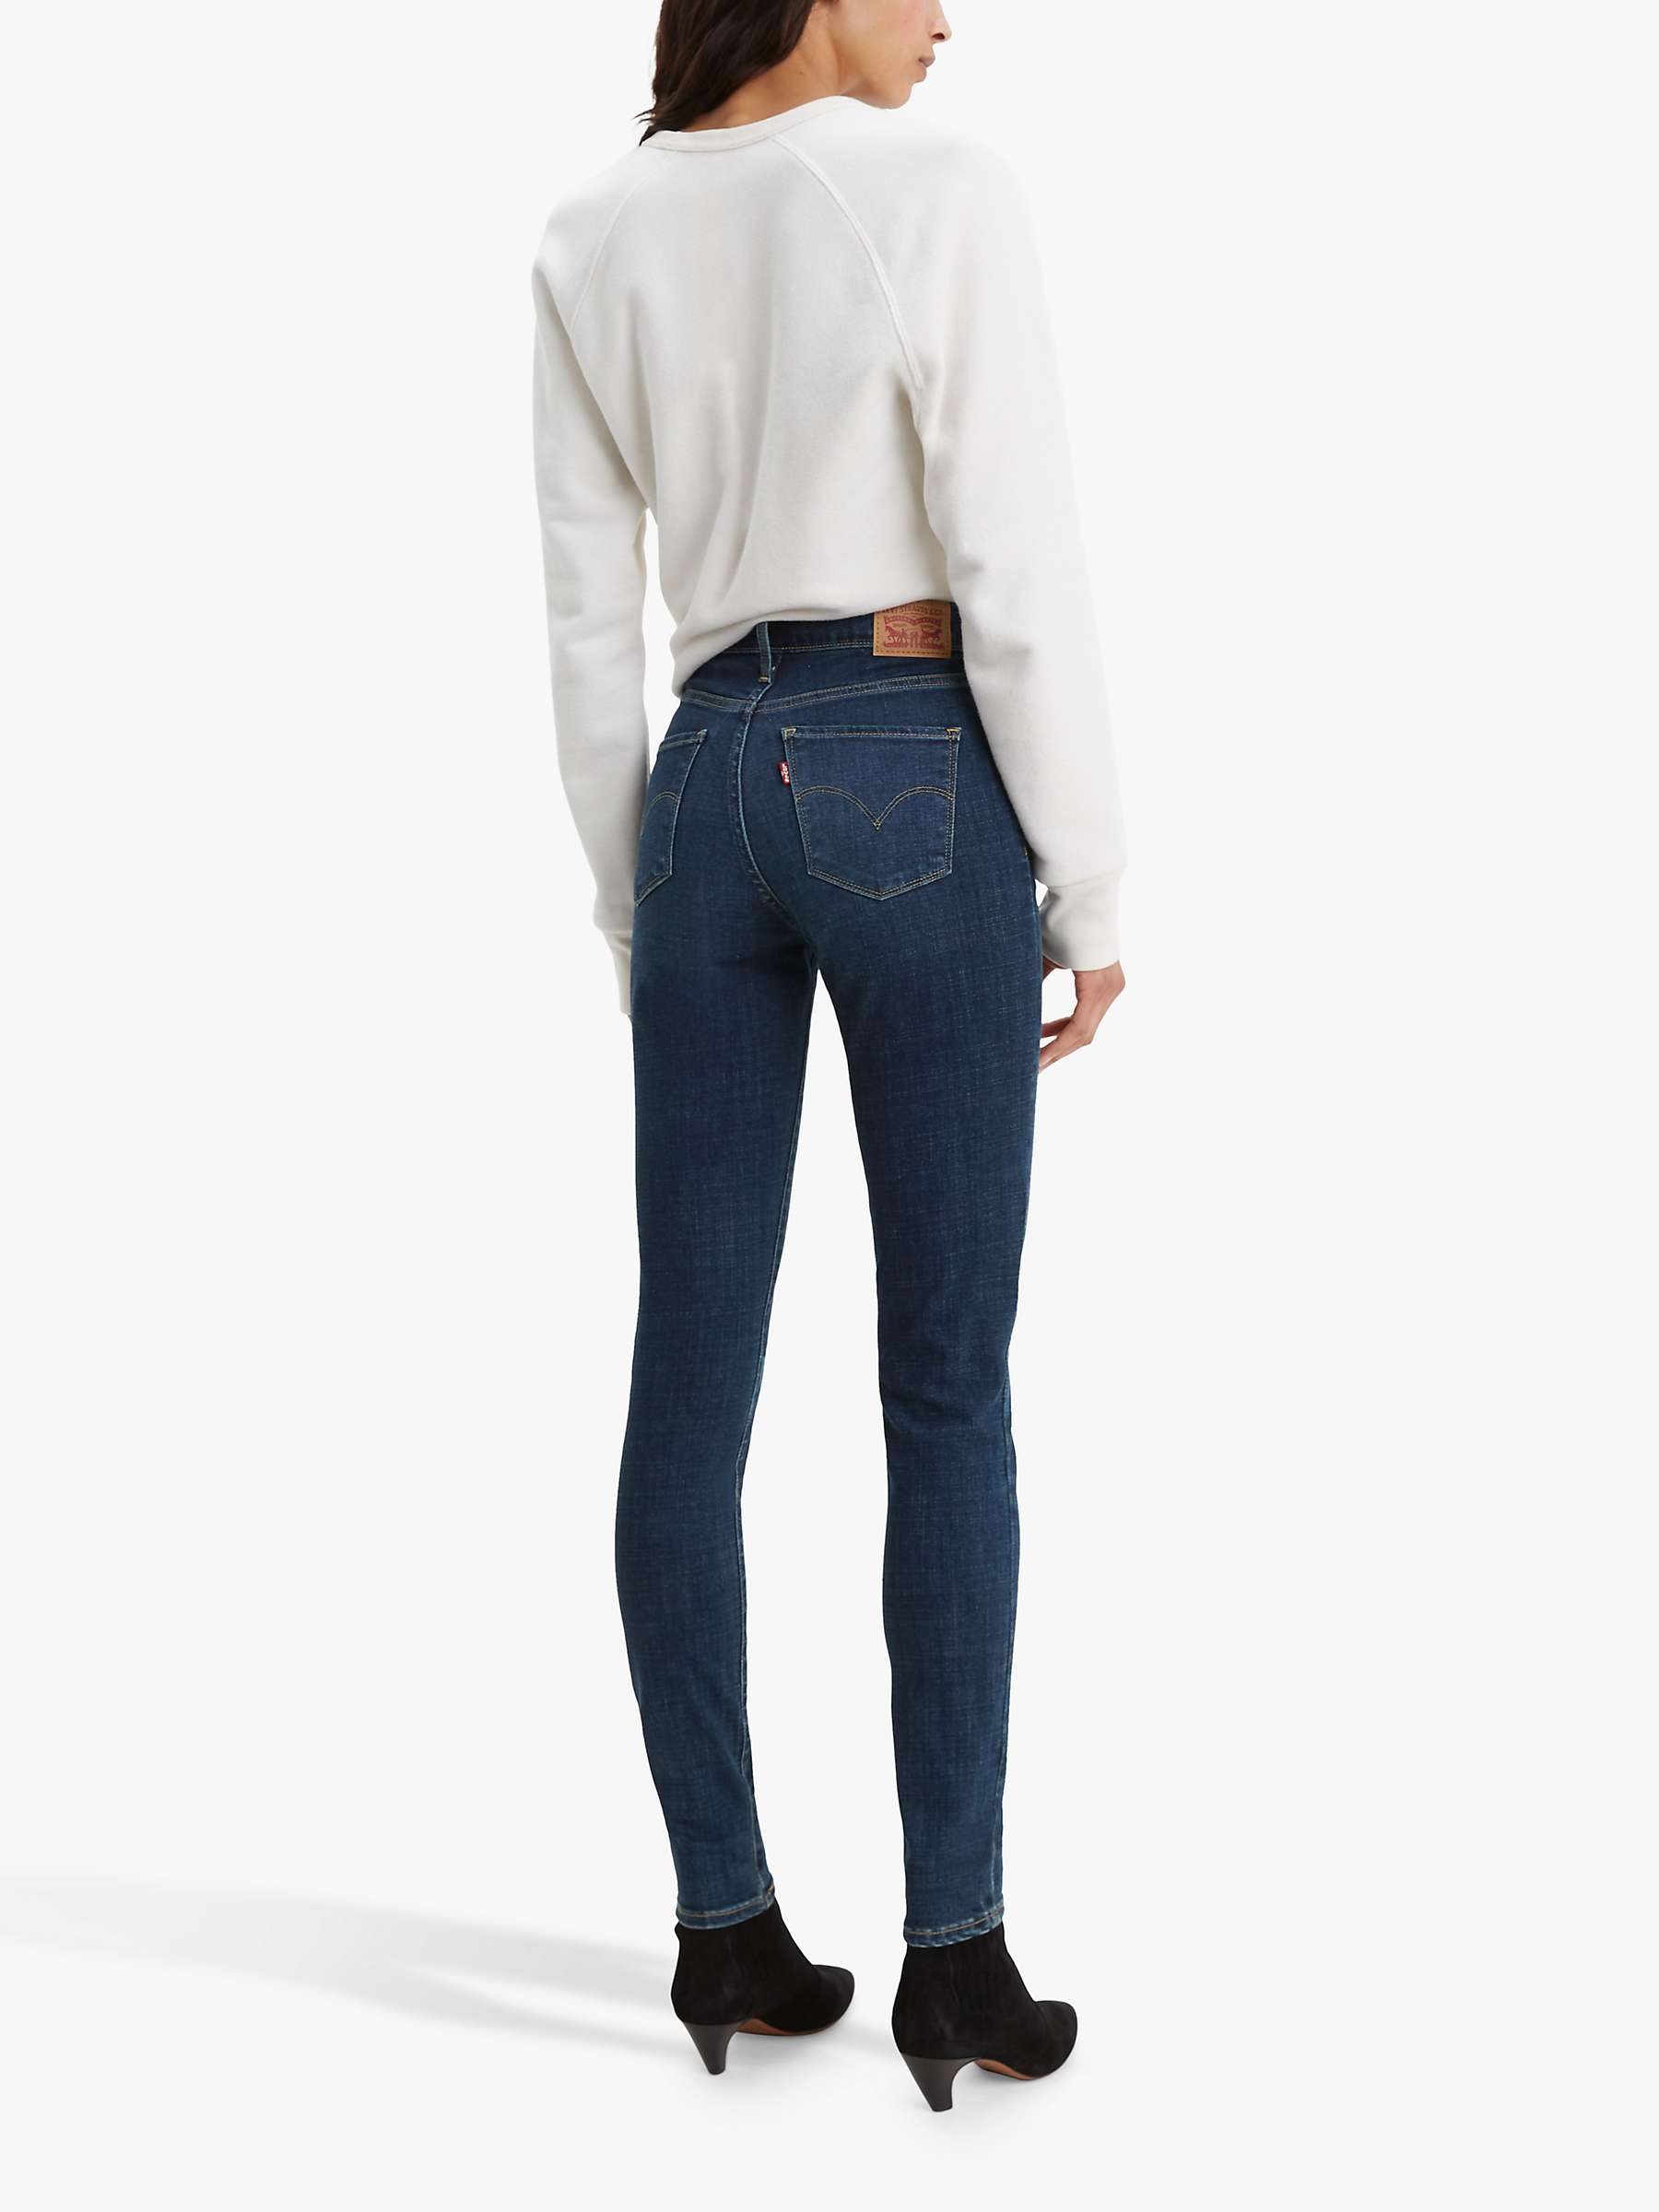 Buy Levi's 311 Shaping Skinny Jeans Online at johnlewis.com